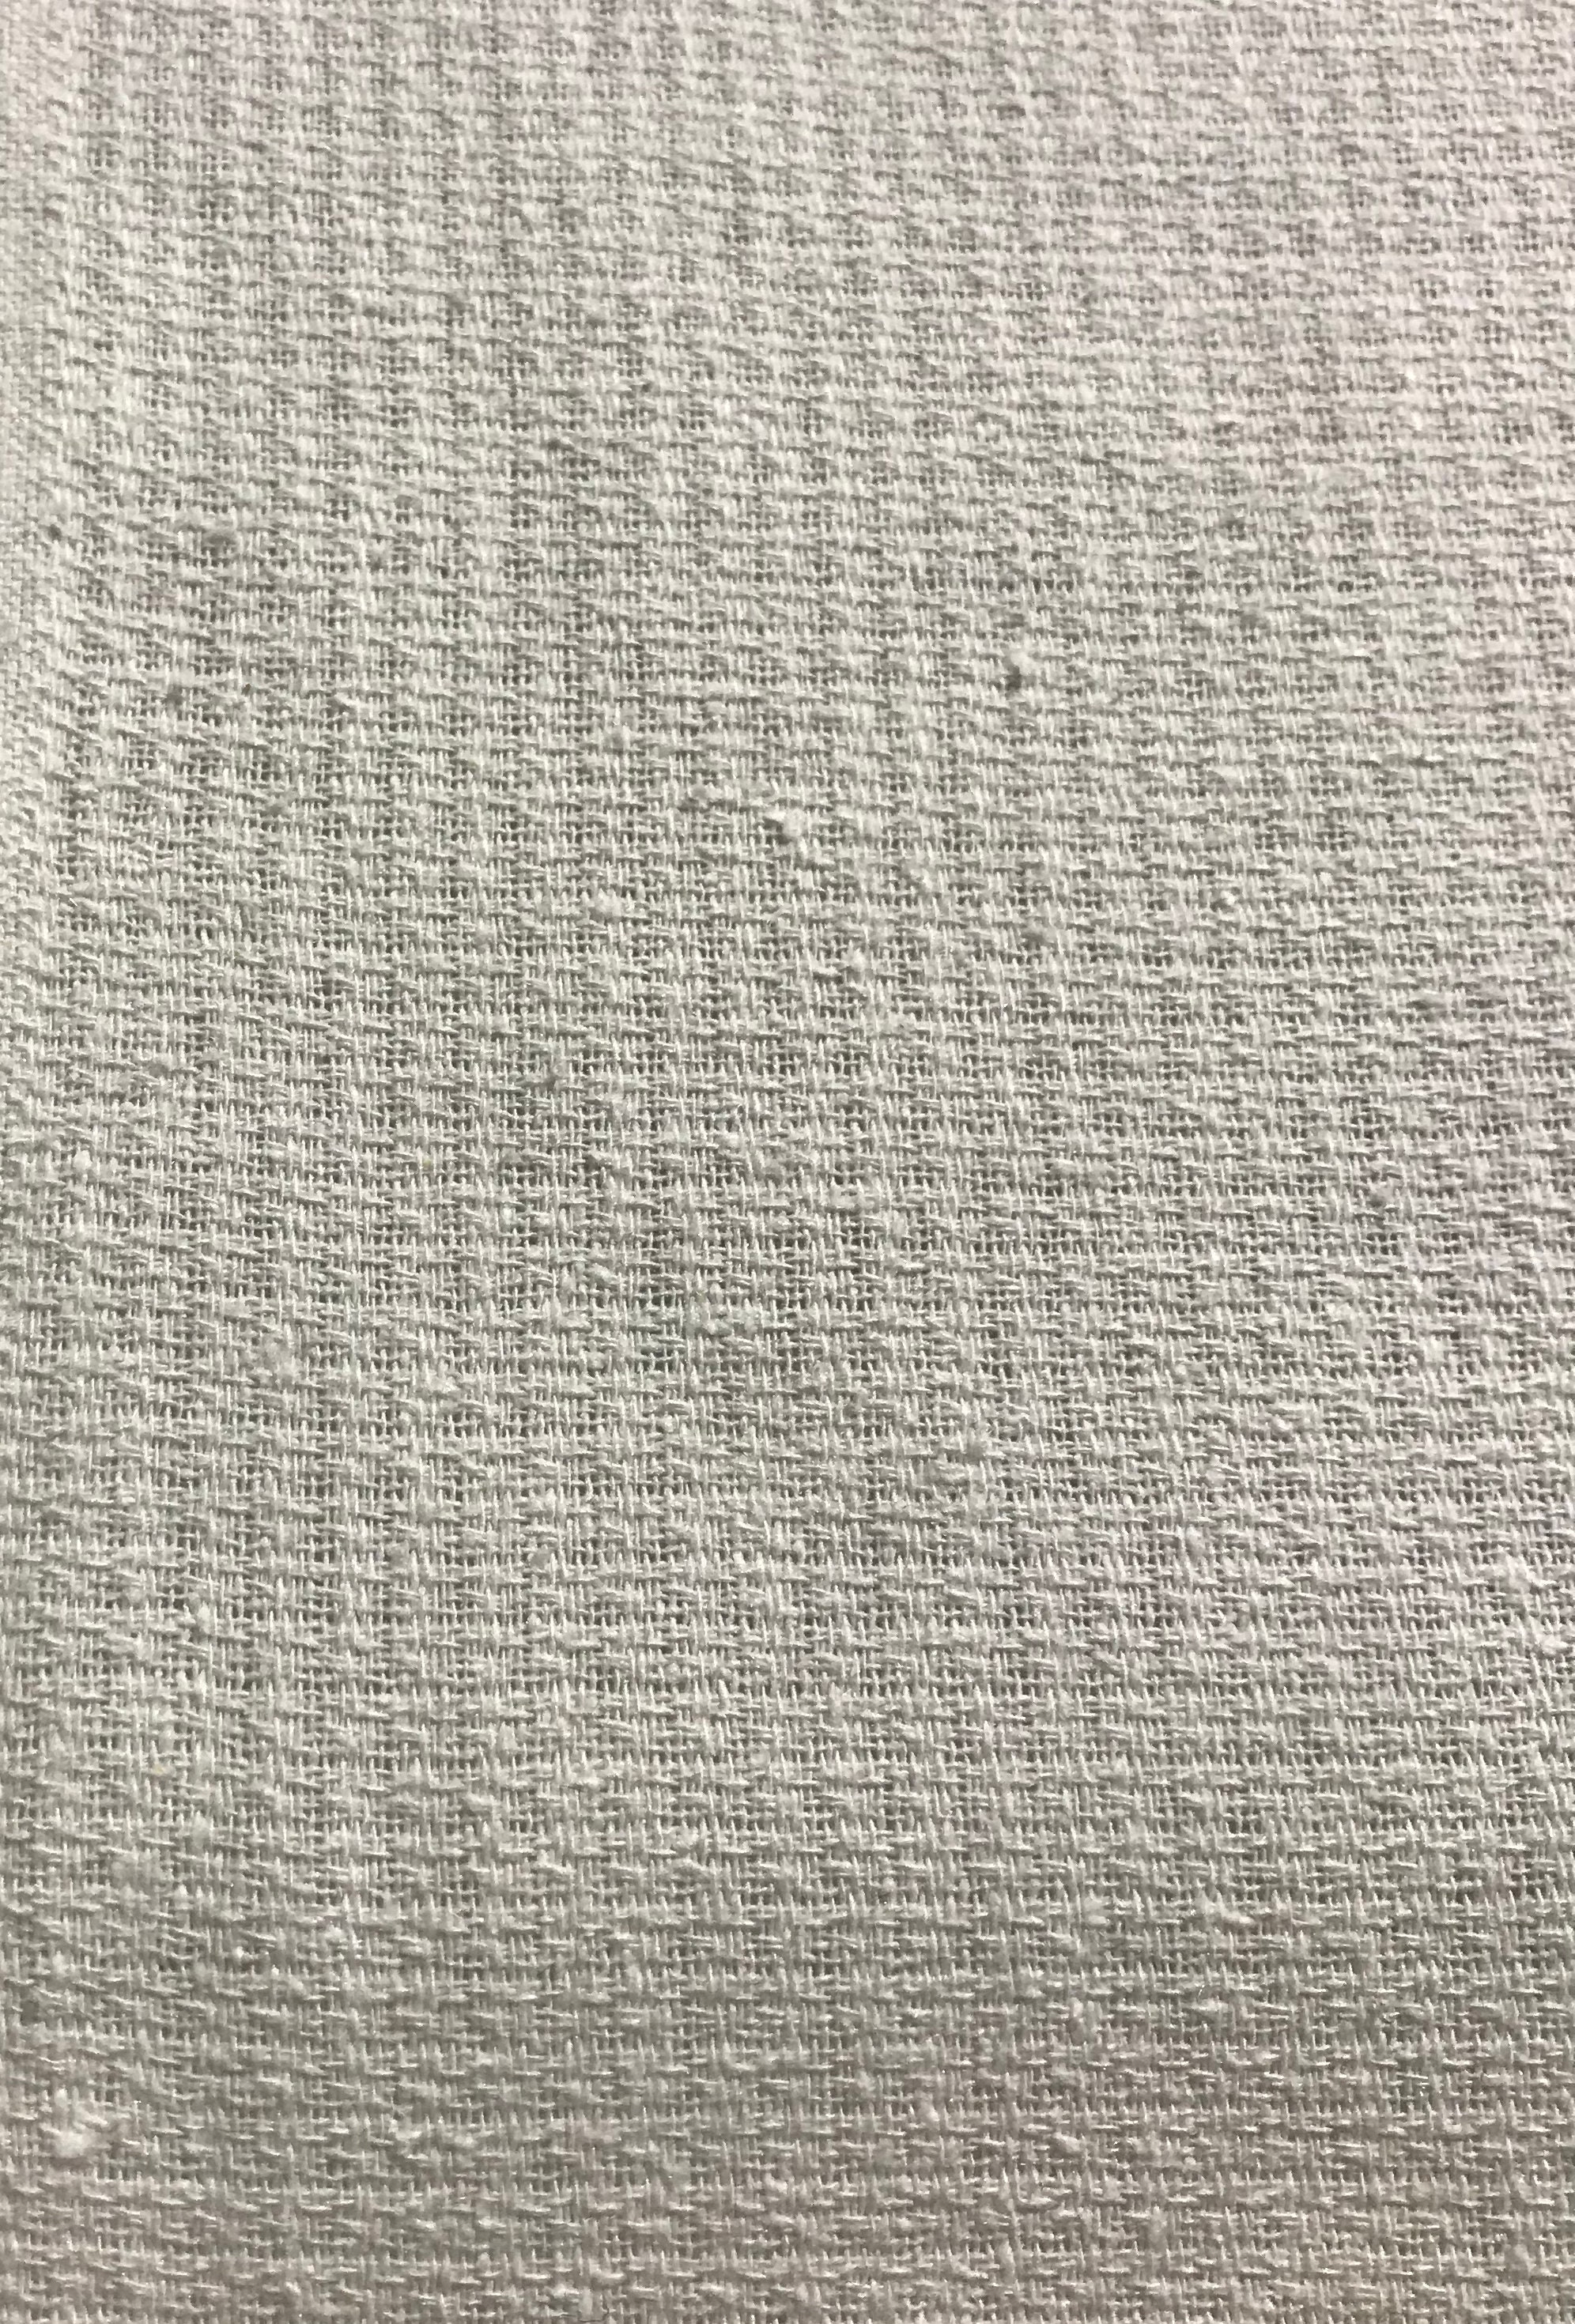 NATURAL WHITE Raw Silk Squares Weave Check NOIL Fabric | Etsy